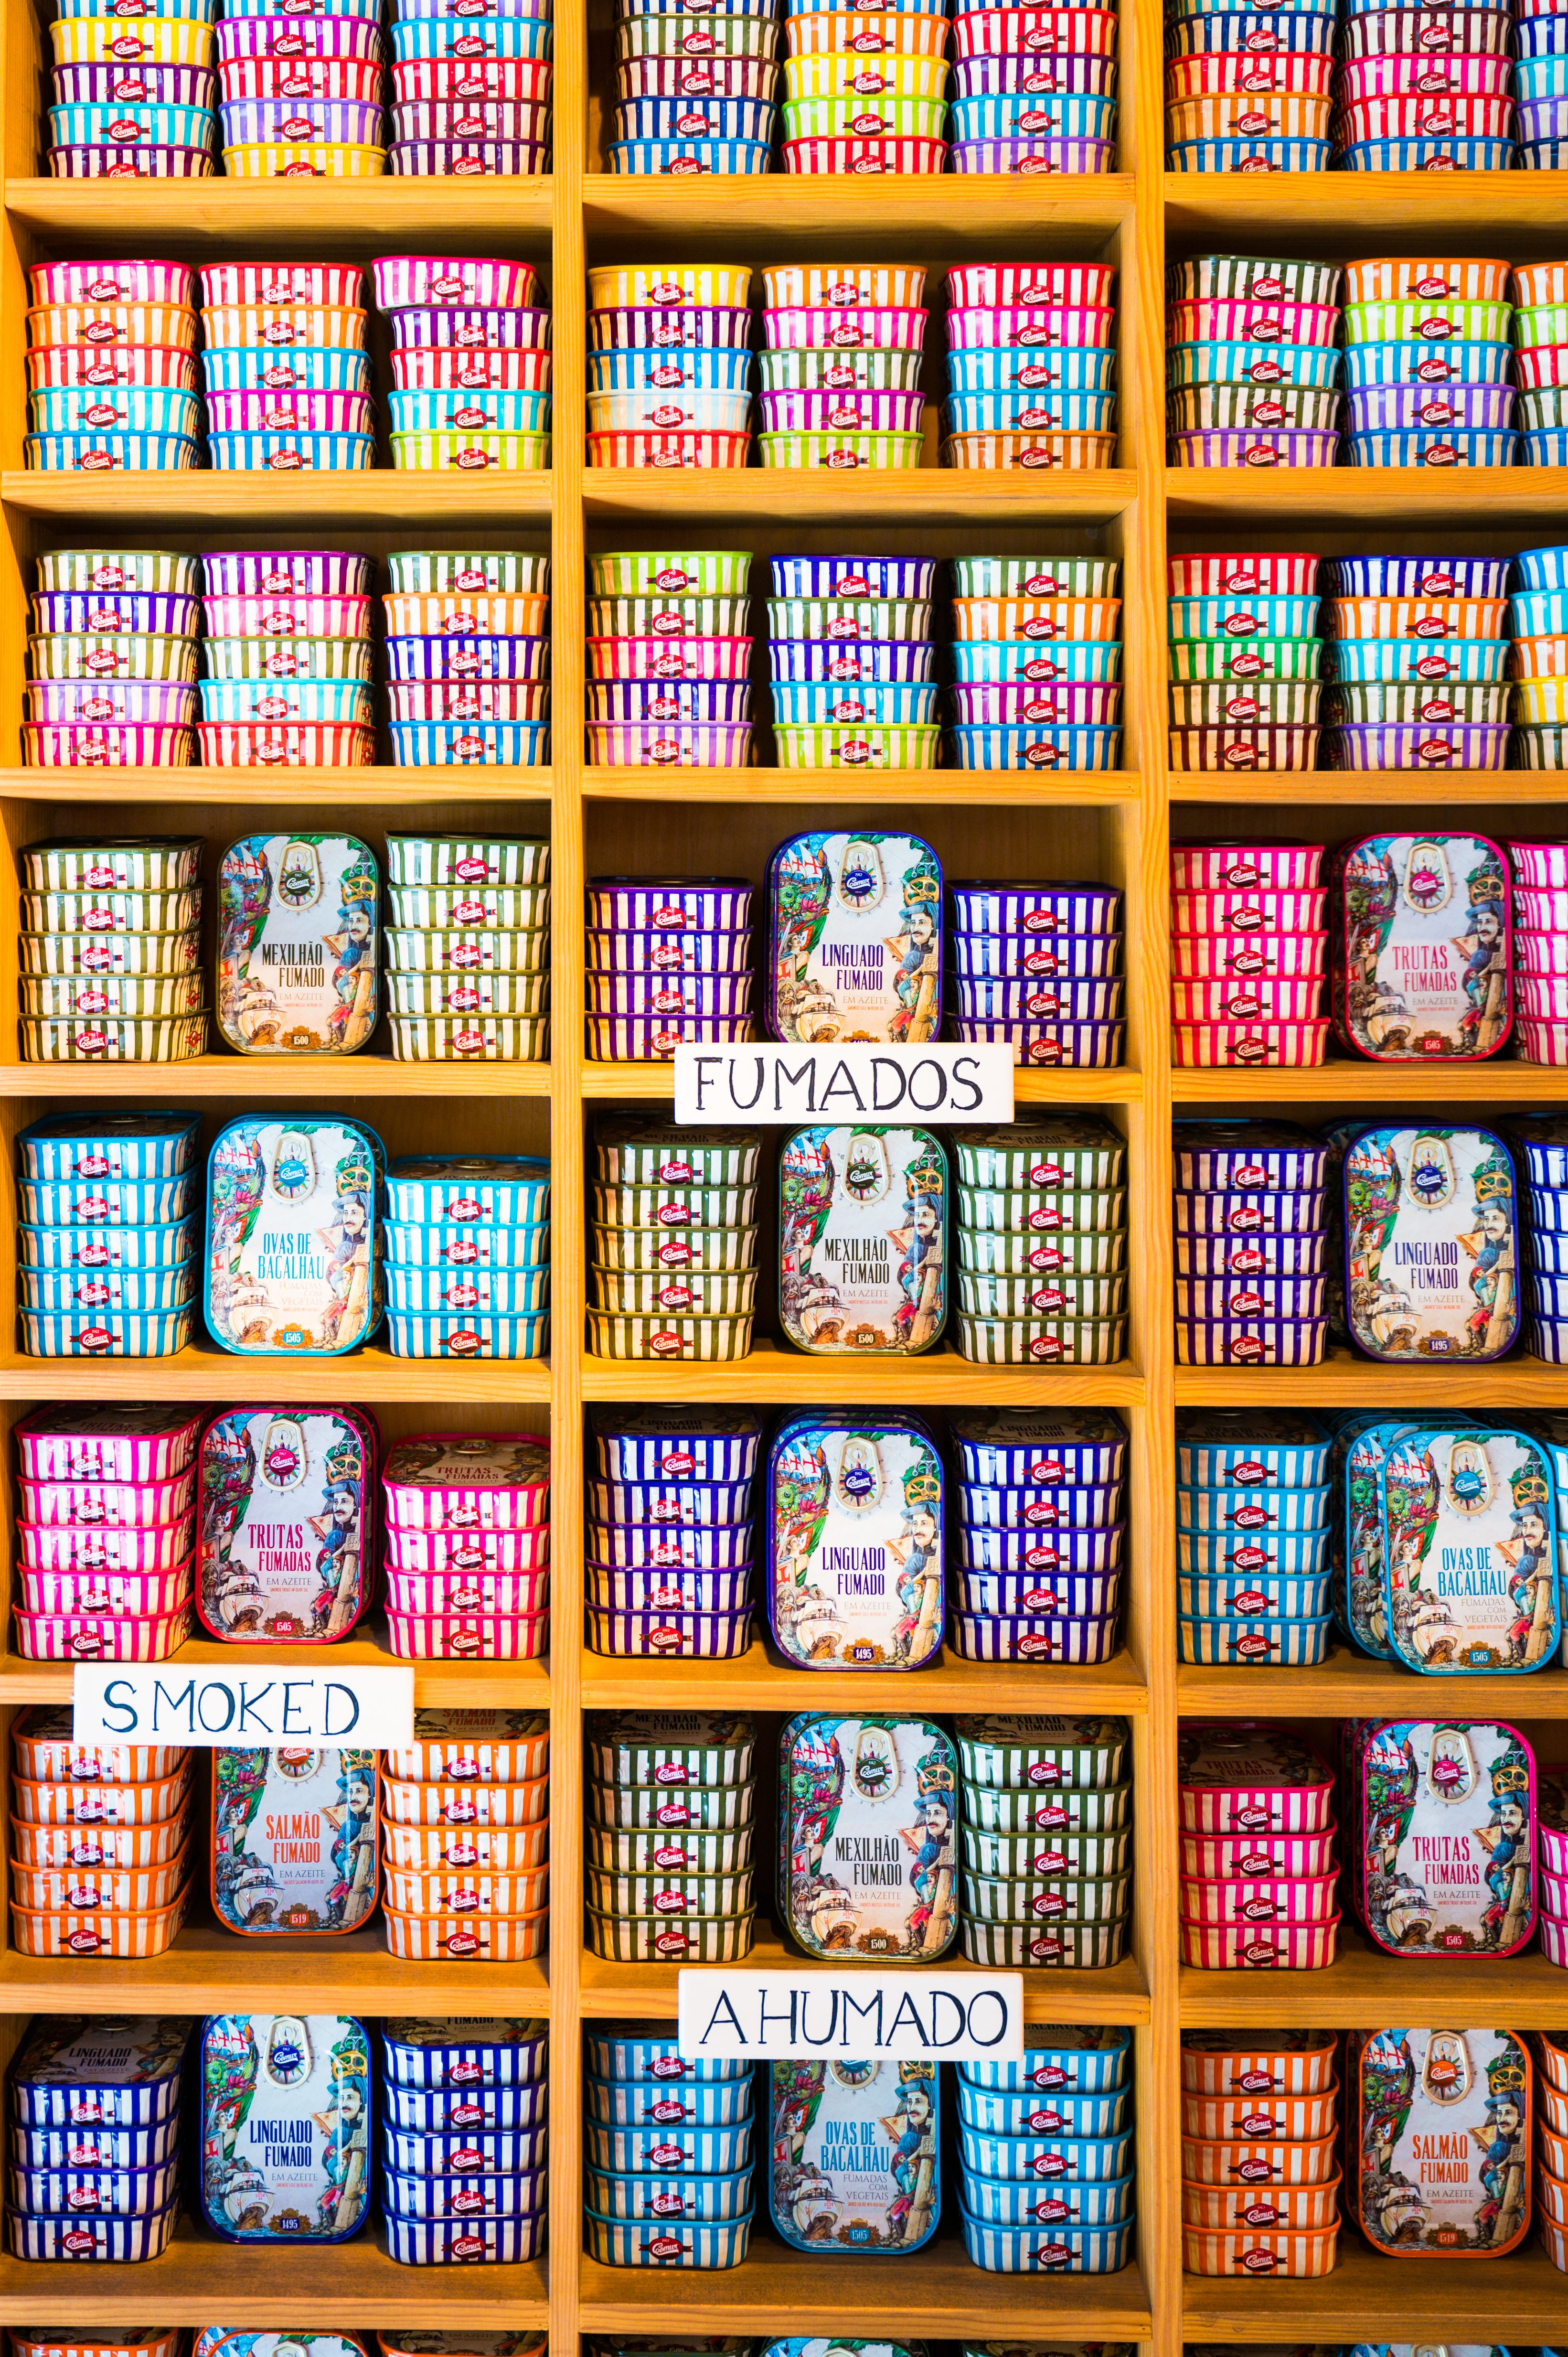 Shelves full of colorful tinned fish in Portugal